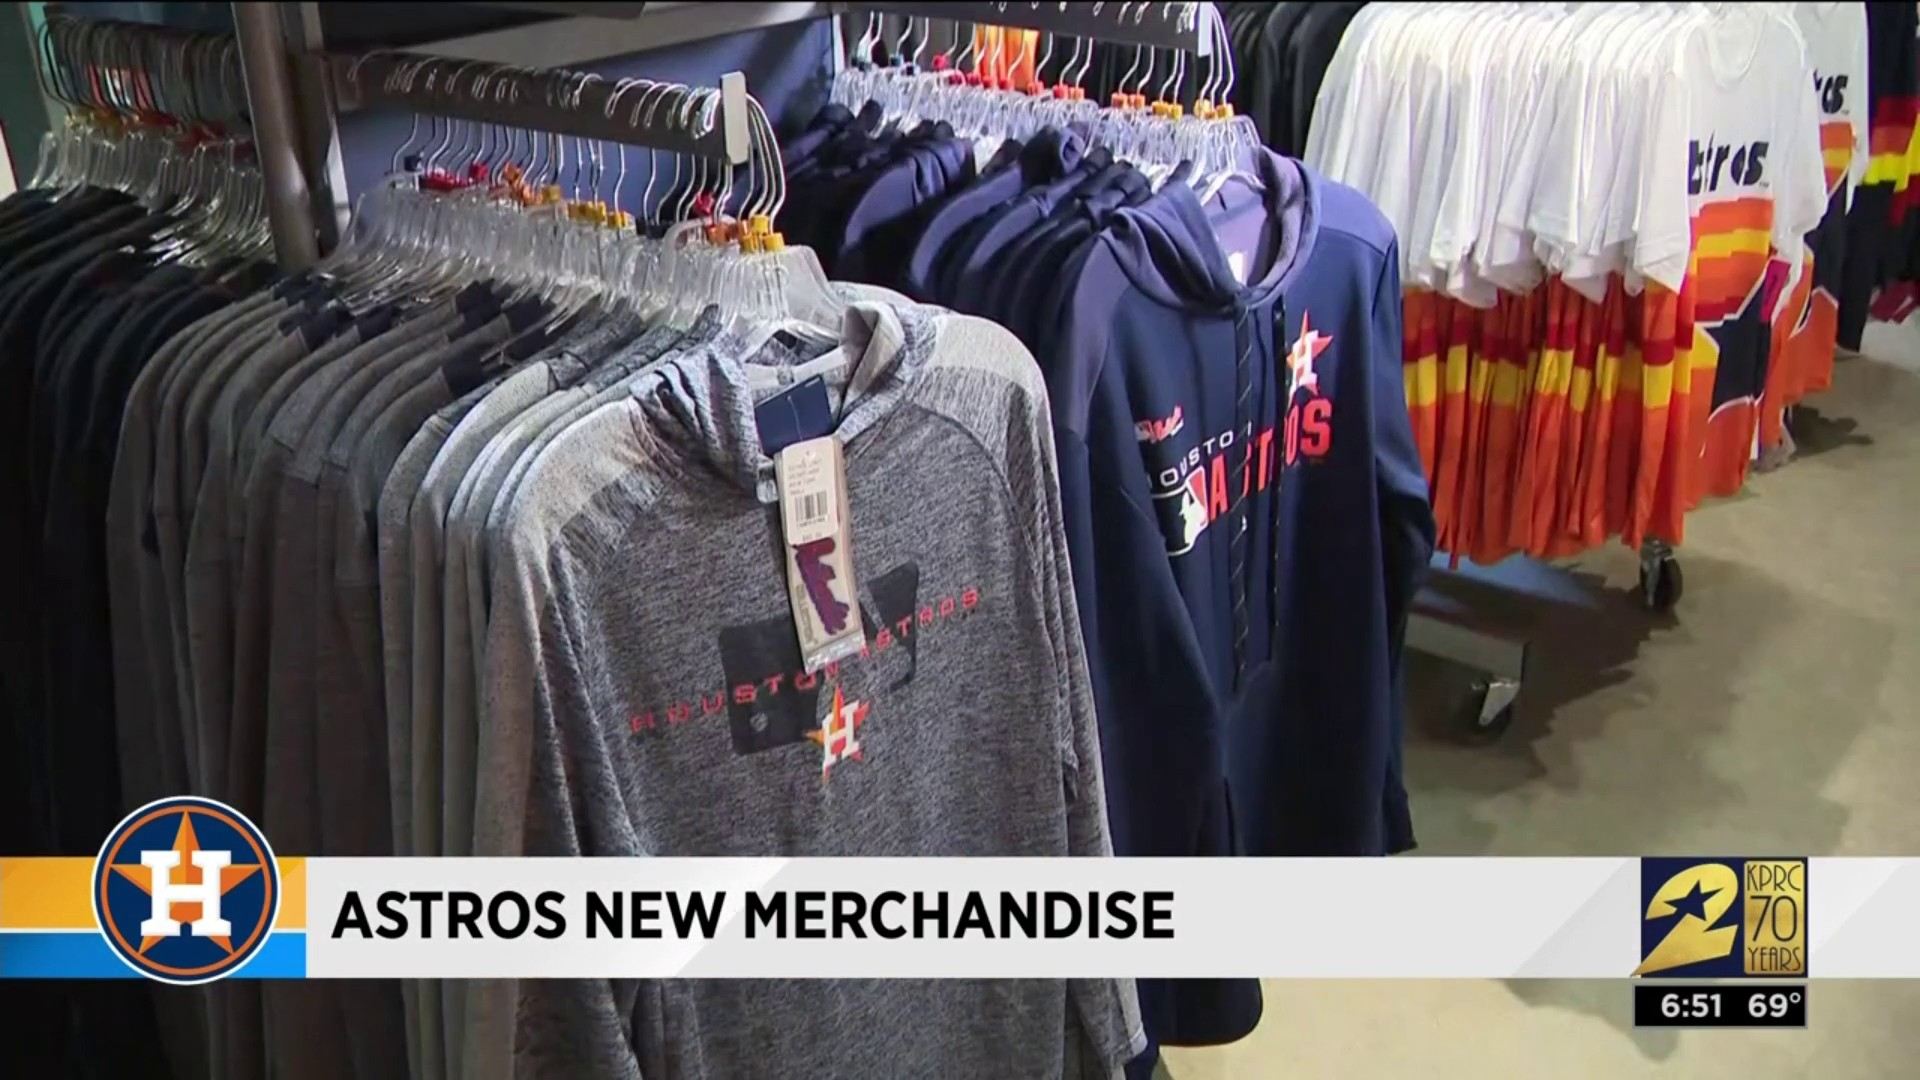 houston astros official team store